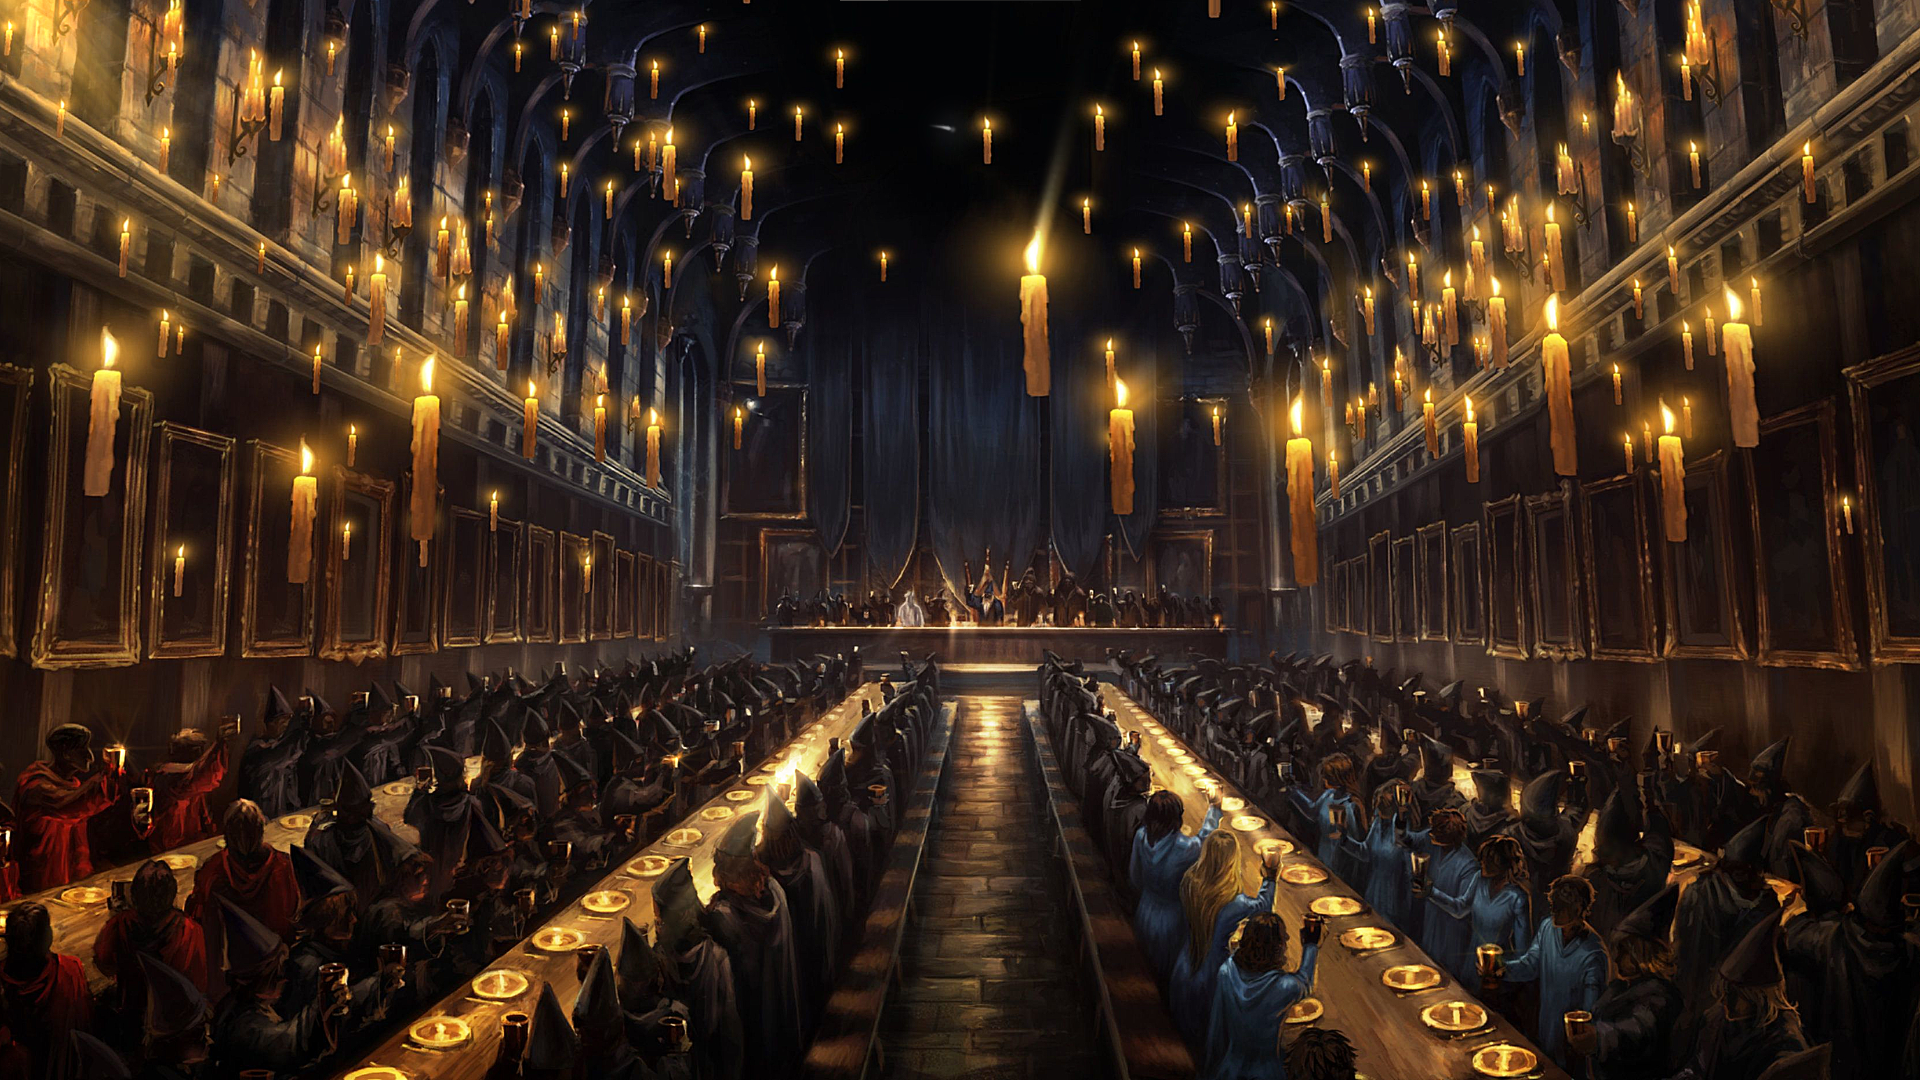 General 1920x1080 Harry Potter Hogwarts interior candles wizard great hall digital art dining room plates drink robes floating Dining table fire castle witch